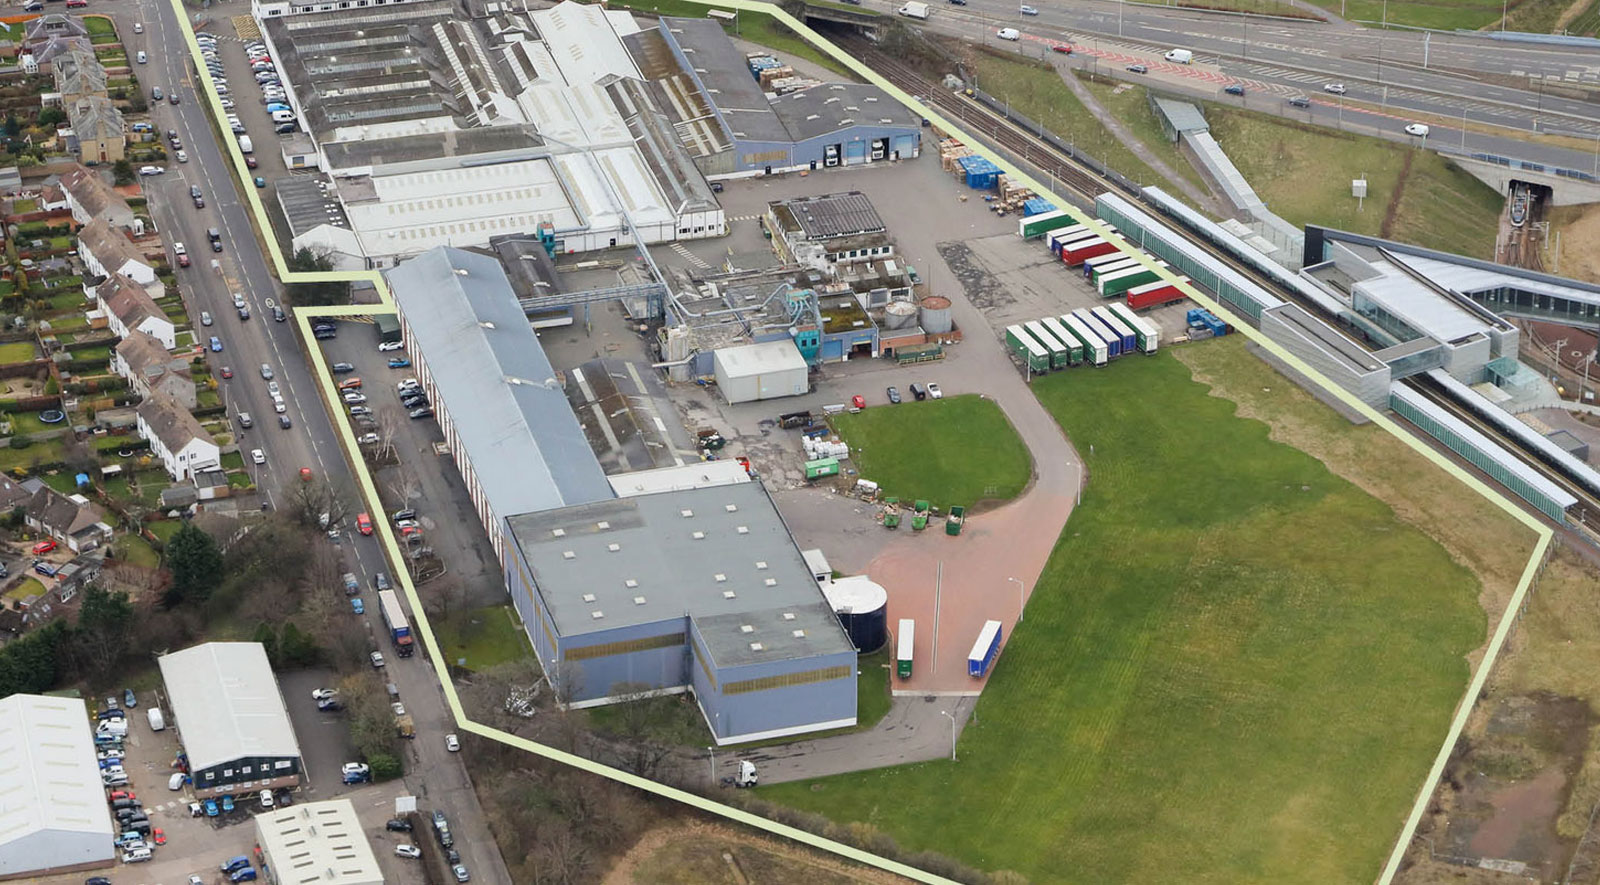 Saica packaging site sold for 1,000 homes development